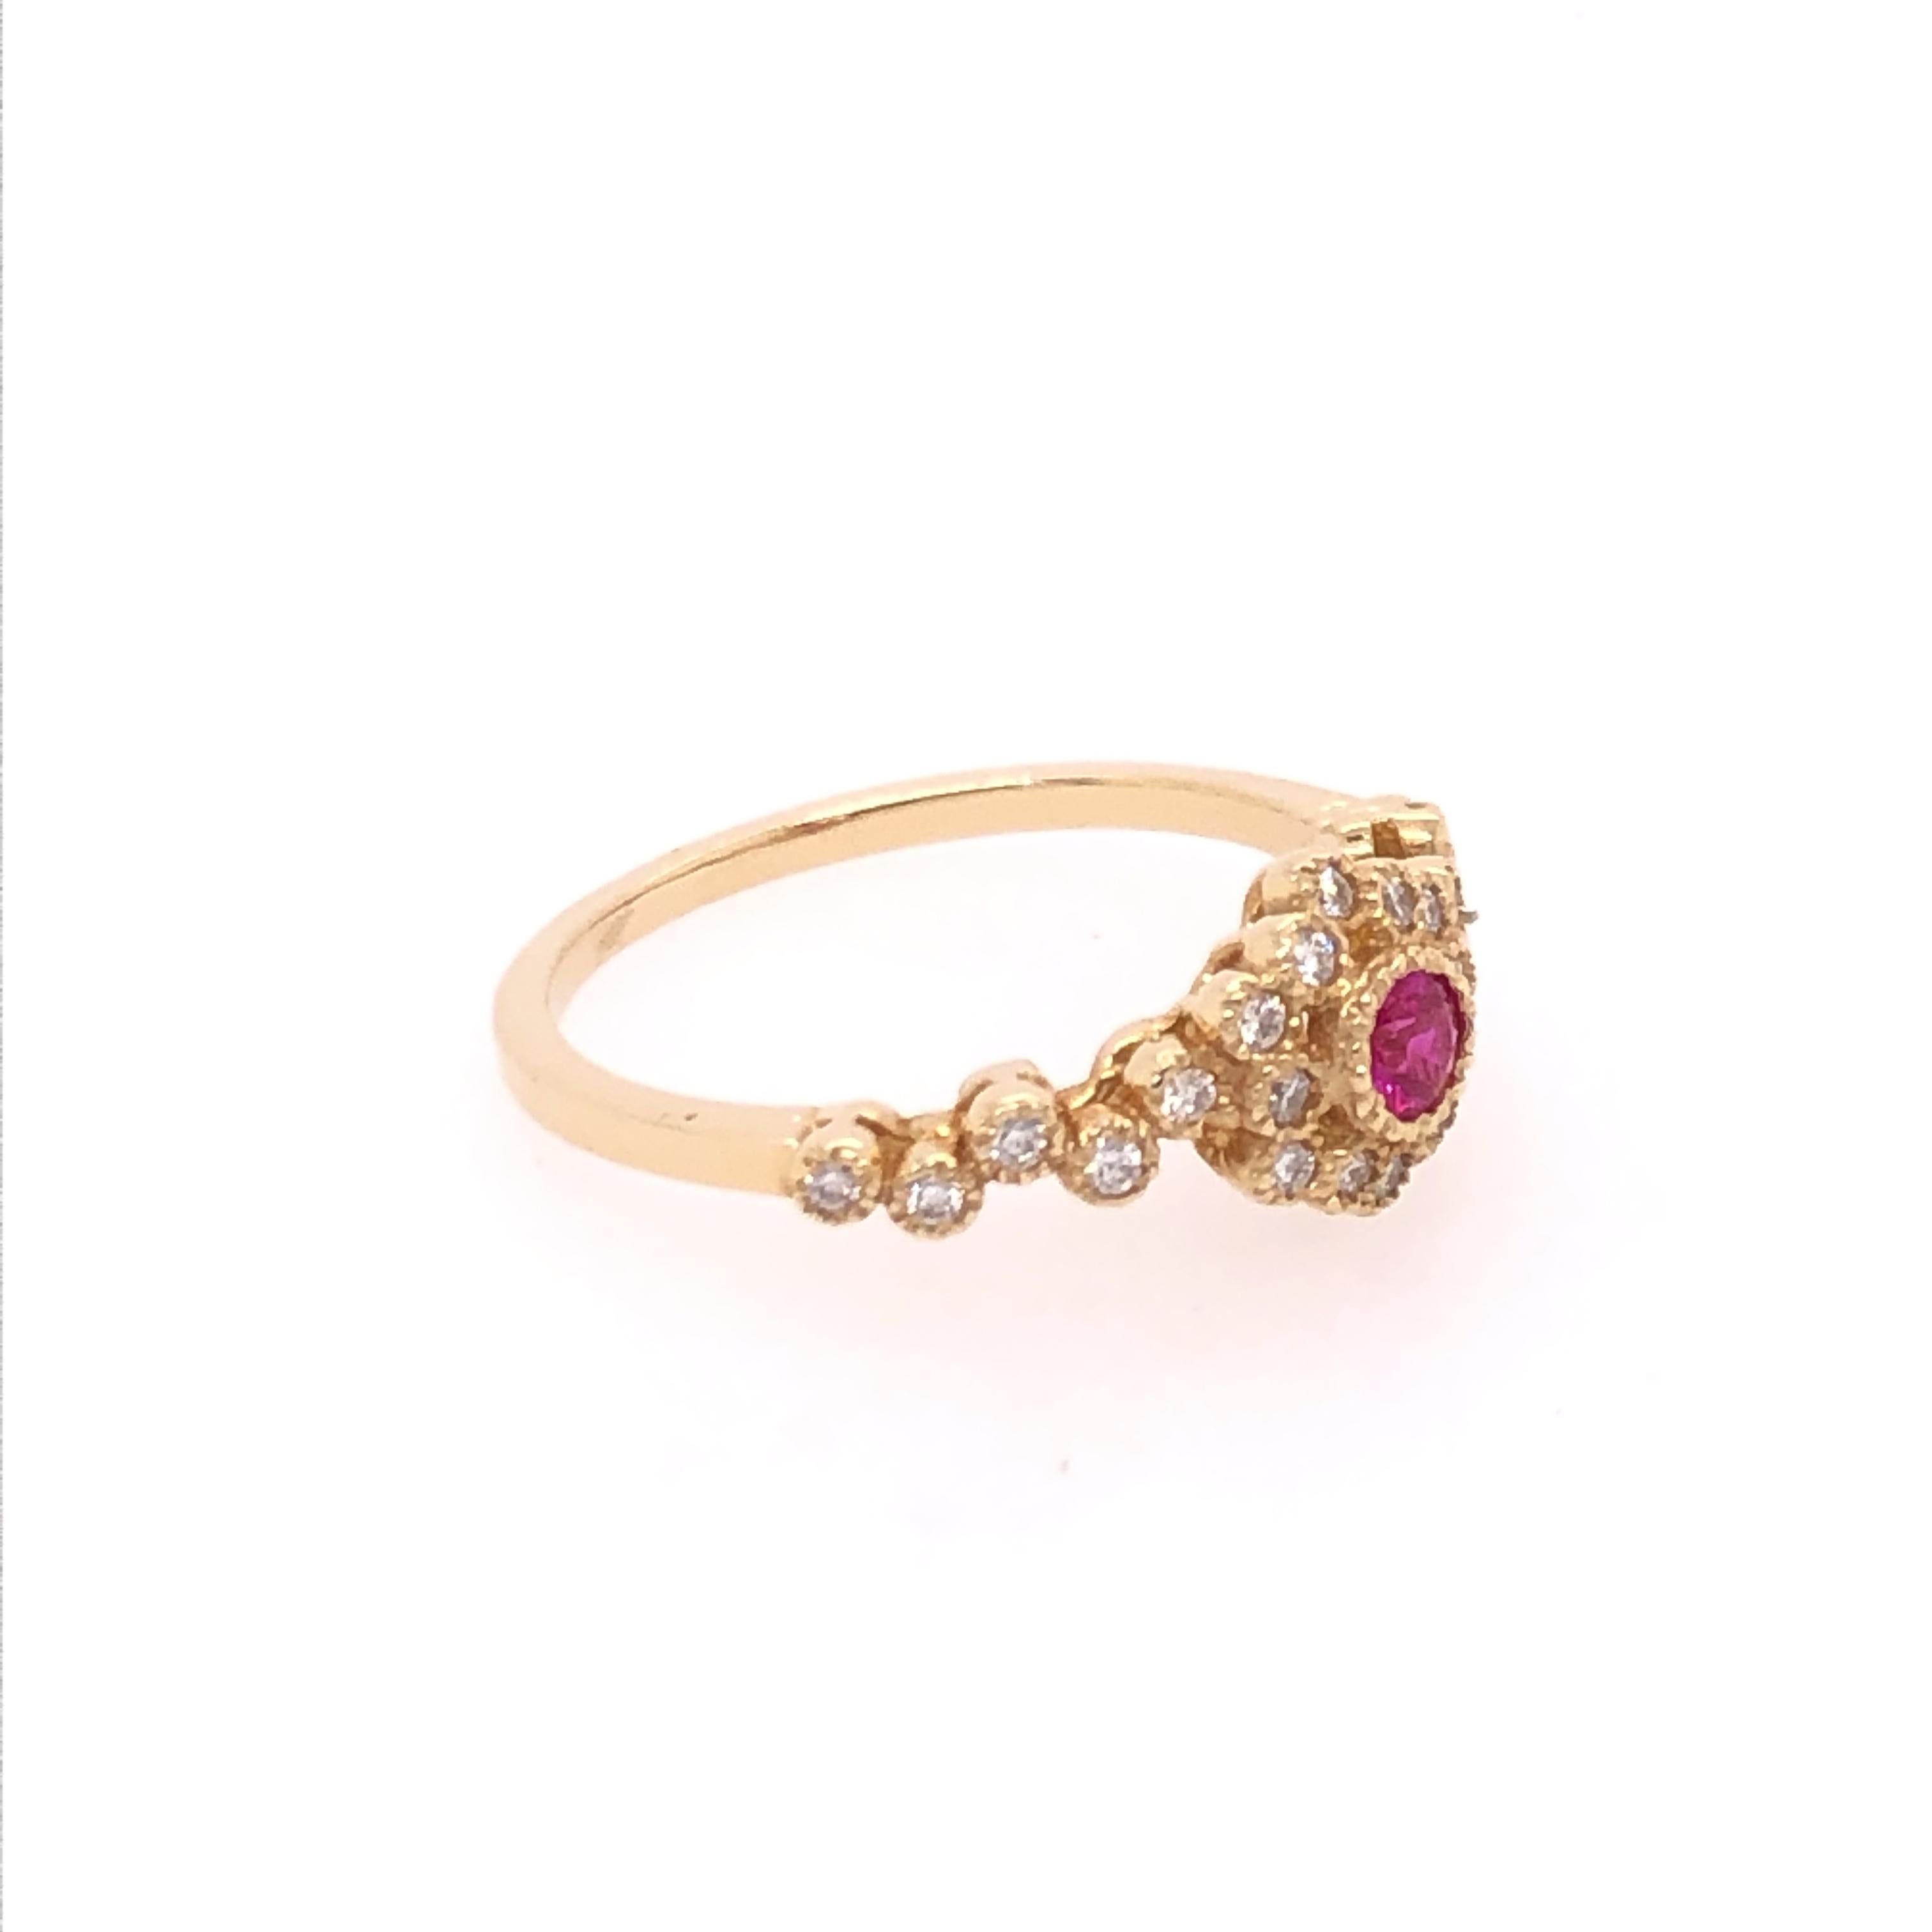 Anglo-Indian Boho Ruby and Diamond Yellow Gold Ring